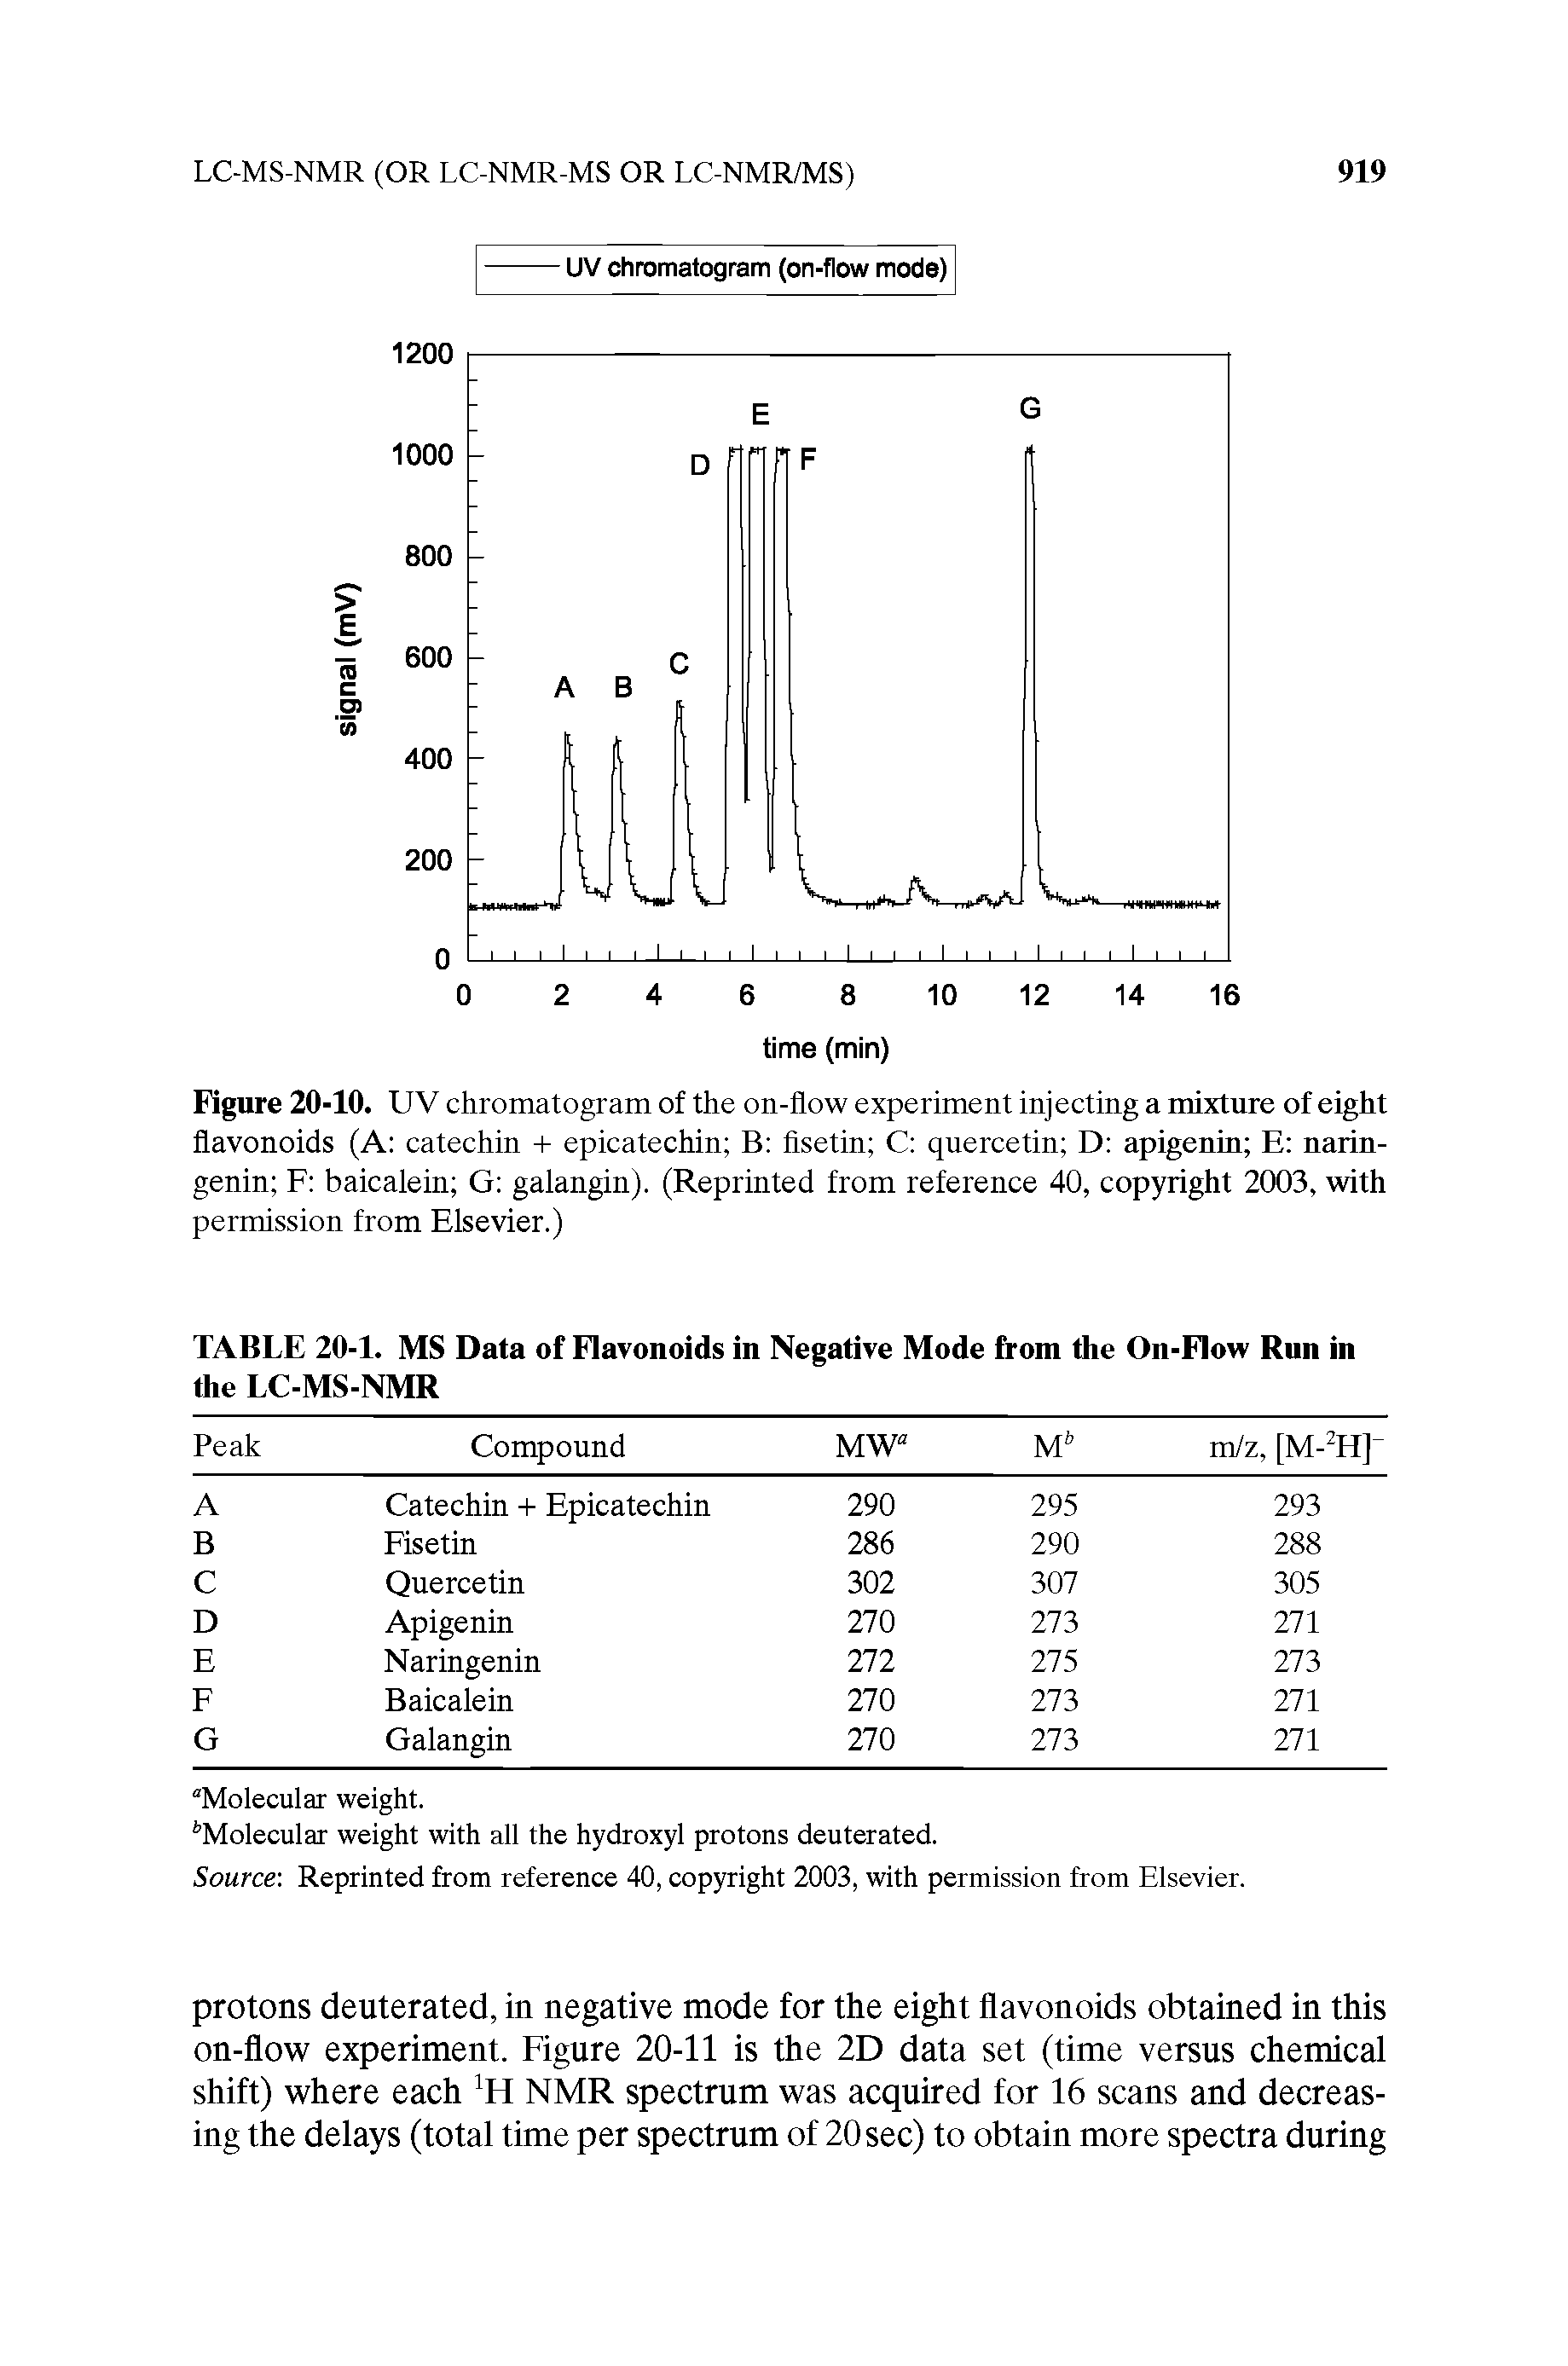 Figure 20-10. UV chromatogram of the on-flow experiment injecting a mixture of eight flavonoids (A catechin -i- epicatechin B flsetin C quercetin D apigeniu E narin-genin F baicalein G galangin). (Reprinted from reference 40, copyright 2003, with permission from Elsevier.)...